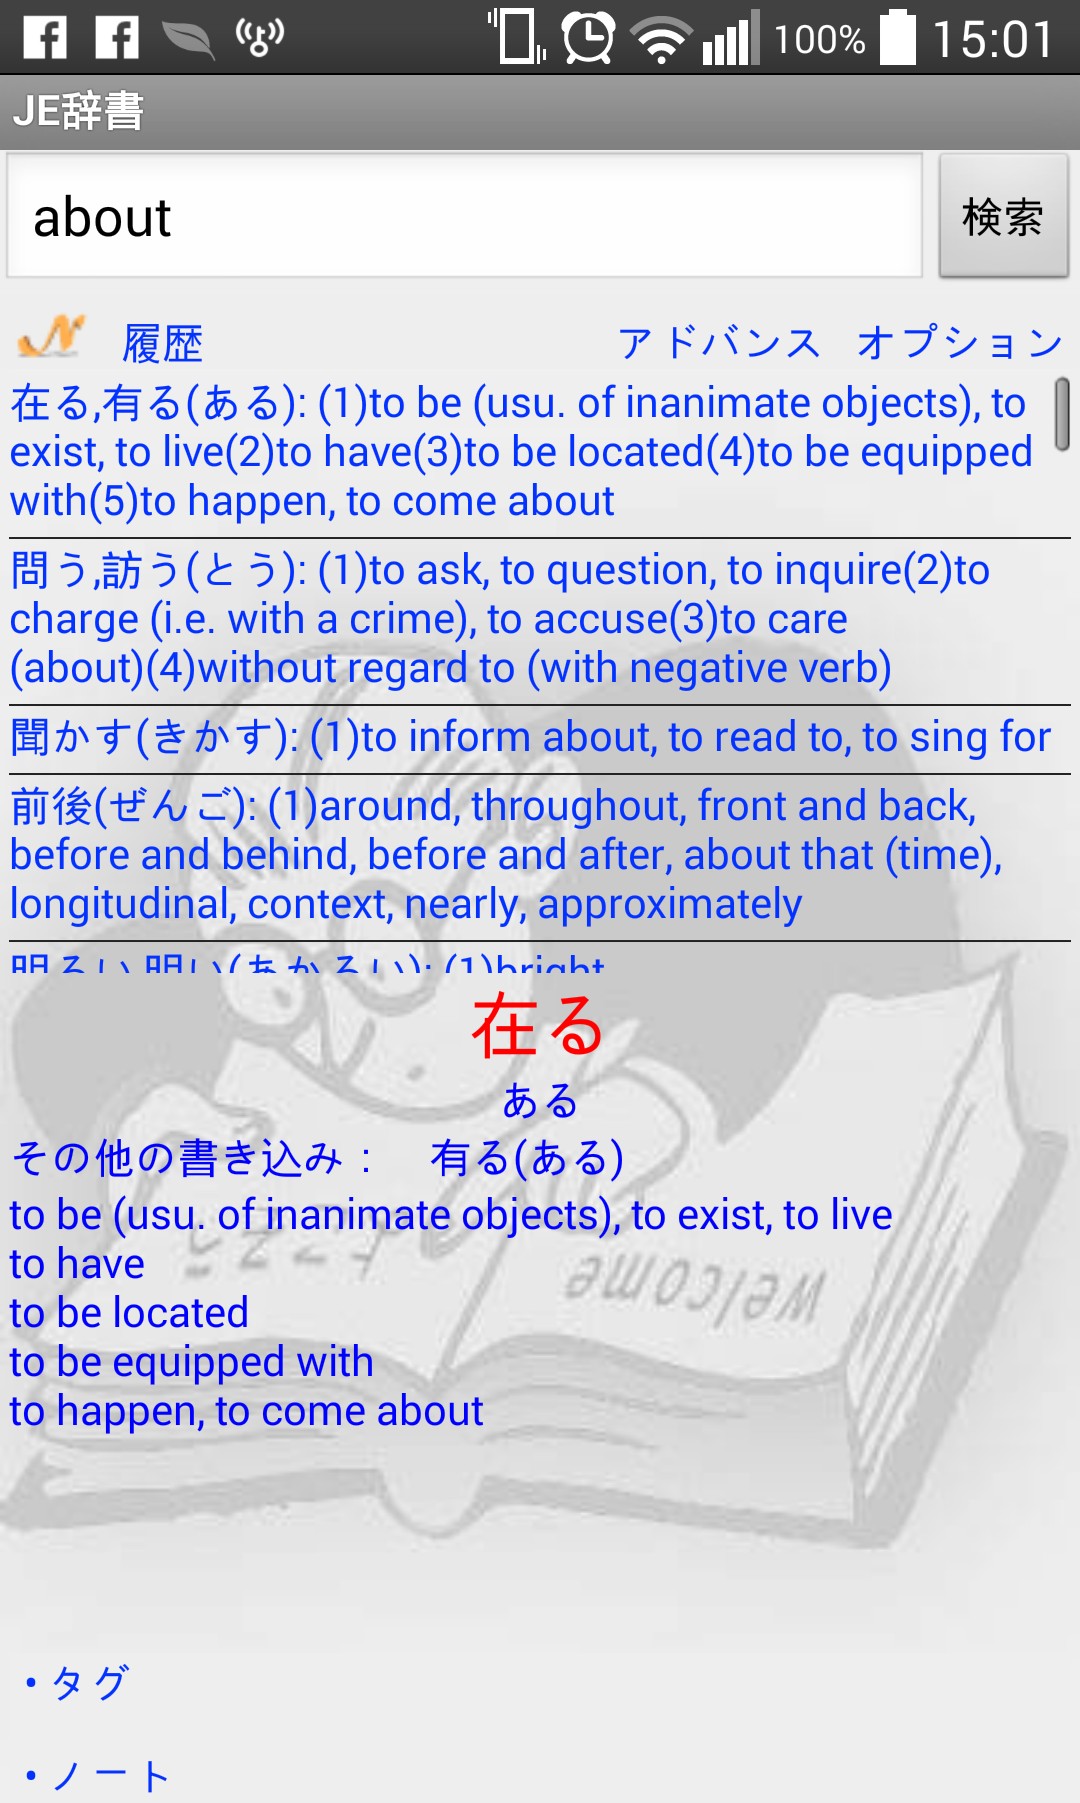 english to japanese dictionary